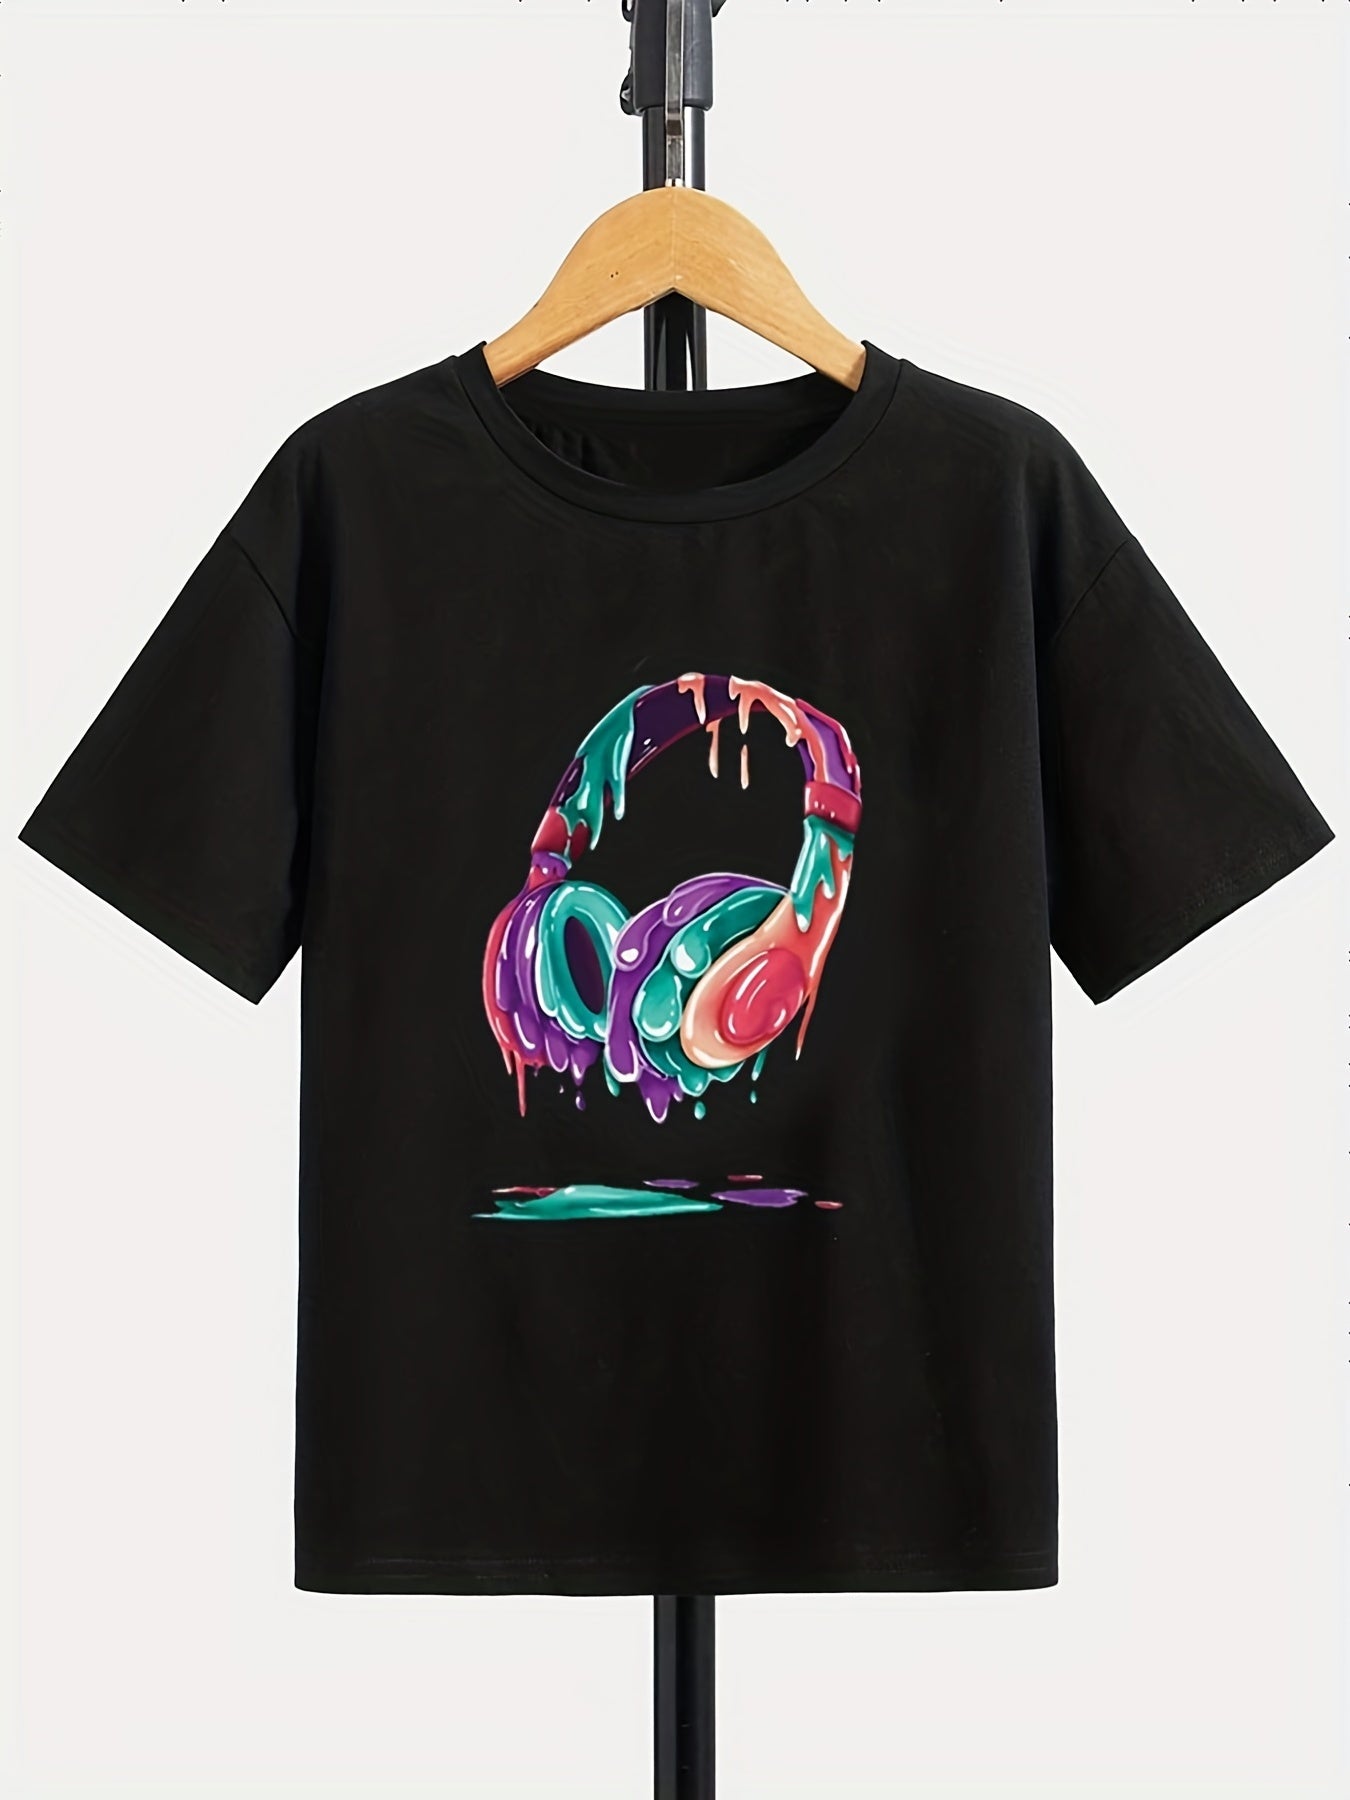 Headphone Graphic Round Neck Cotton T-shirt Tees Tops Casual Soft Comfortable Boys And Girls Summer Clothes